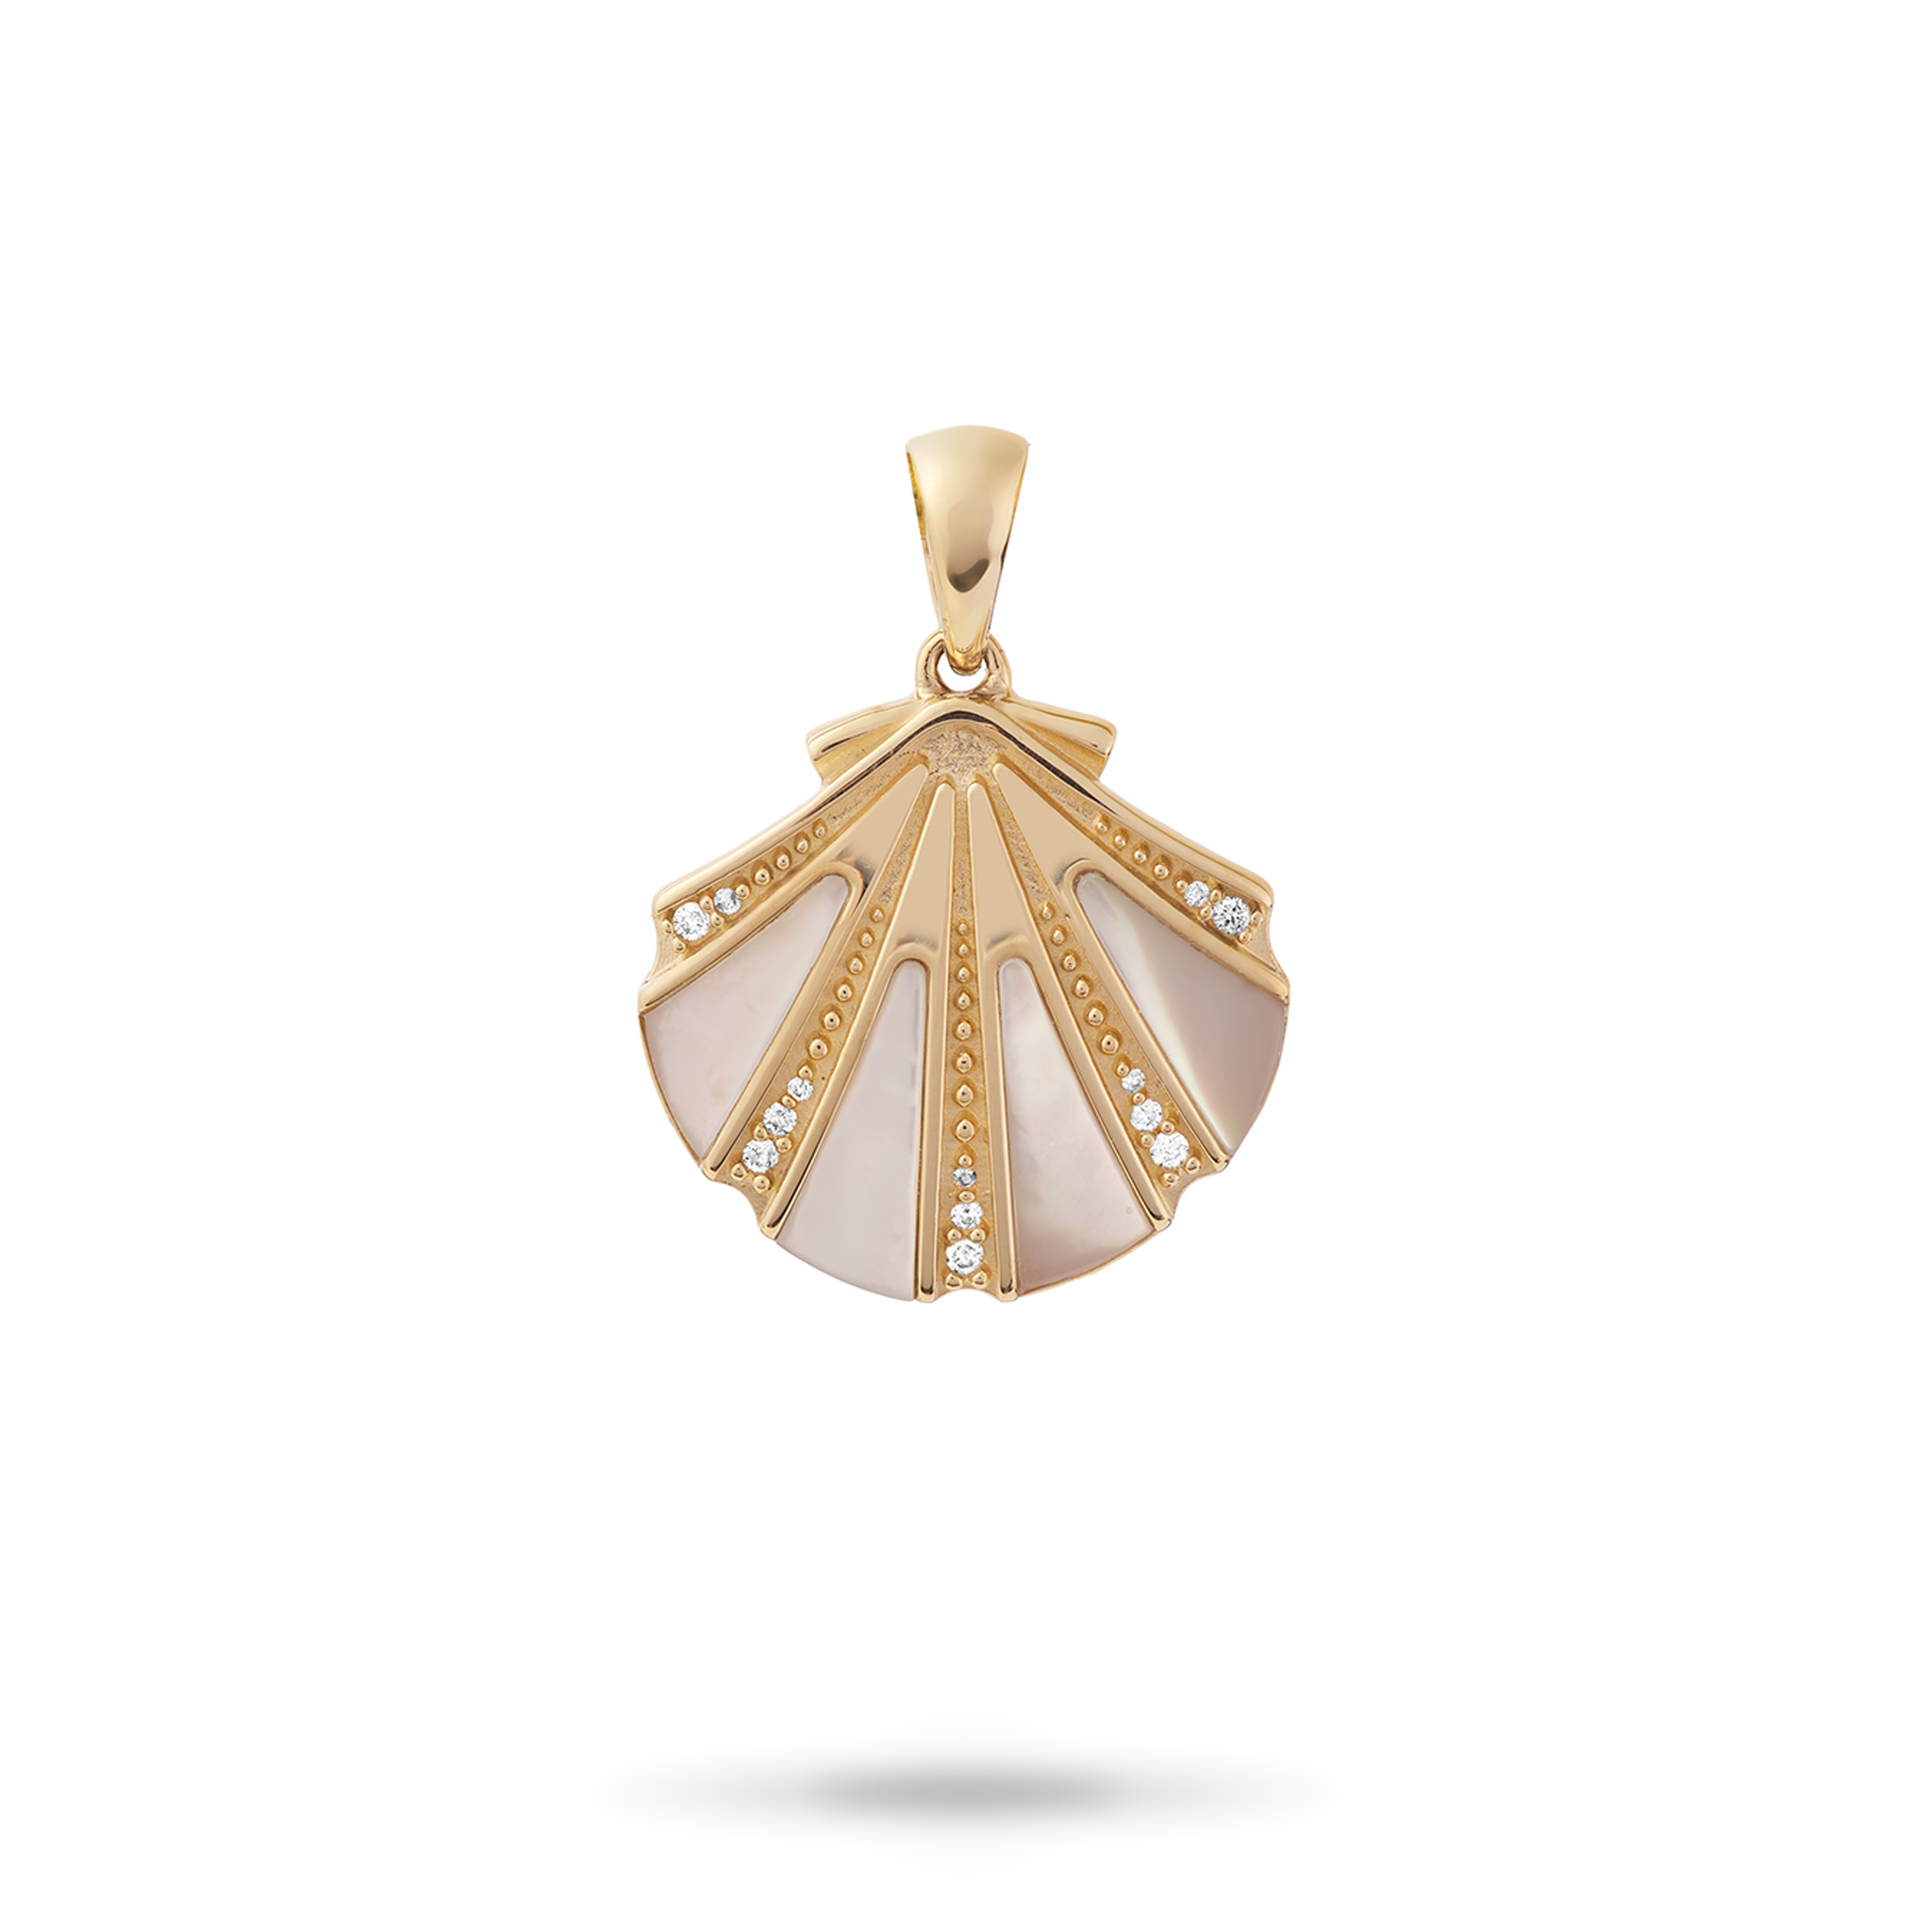 Sealife Seashell Mother of Pearl Pendant in Gold with Diamonds - 18mm